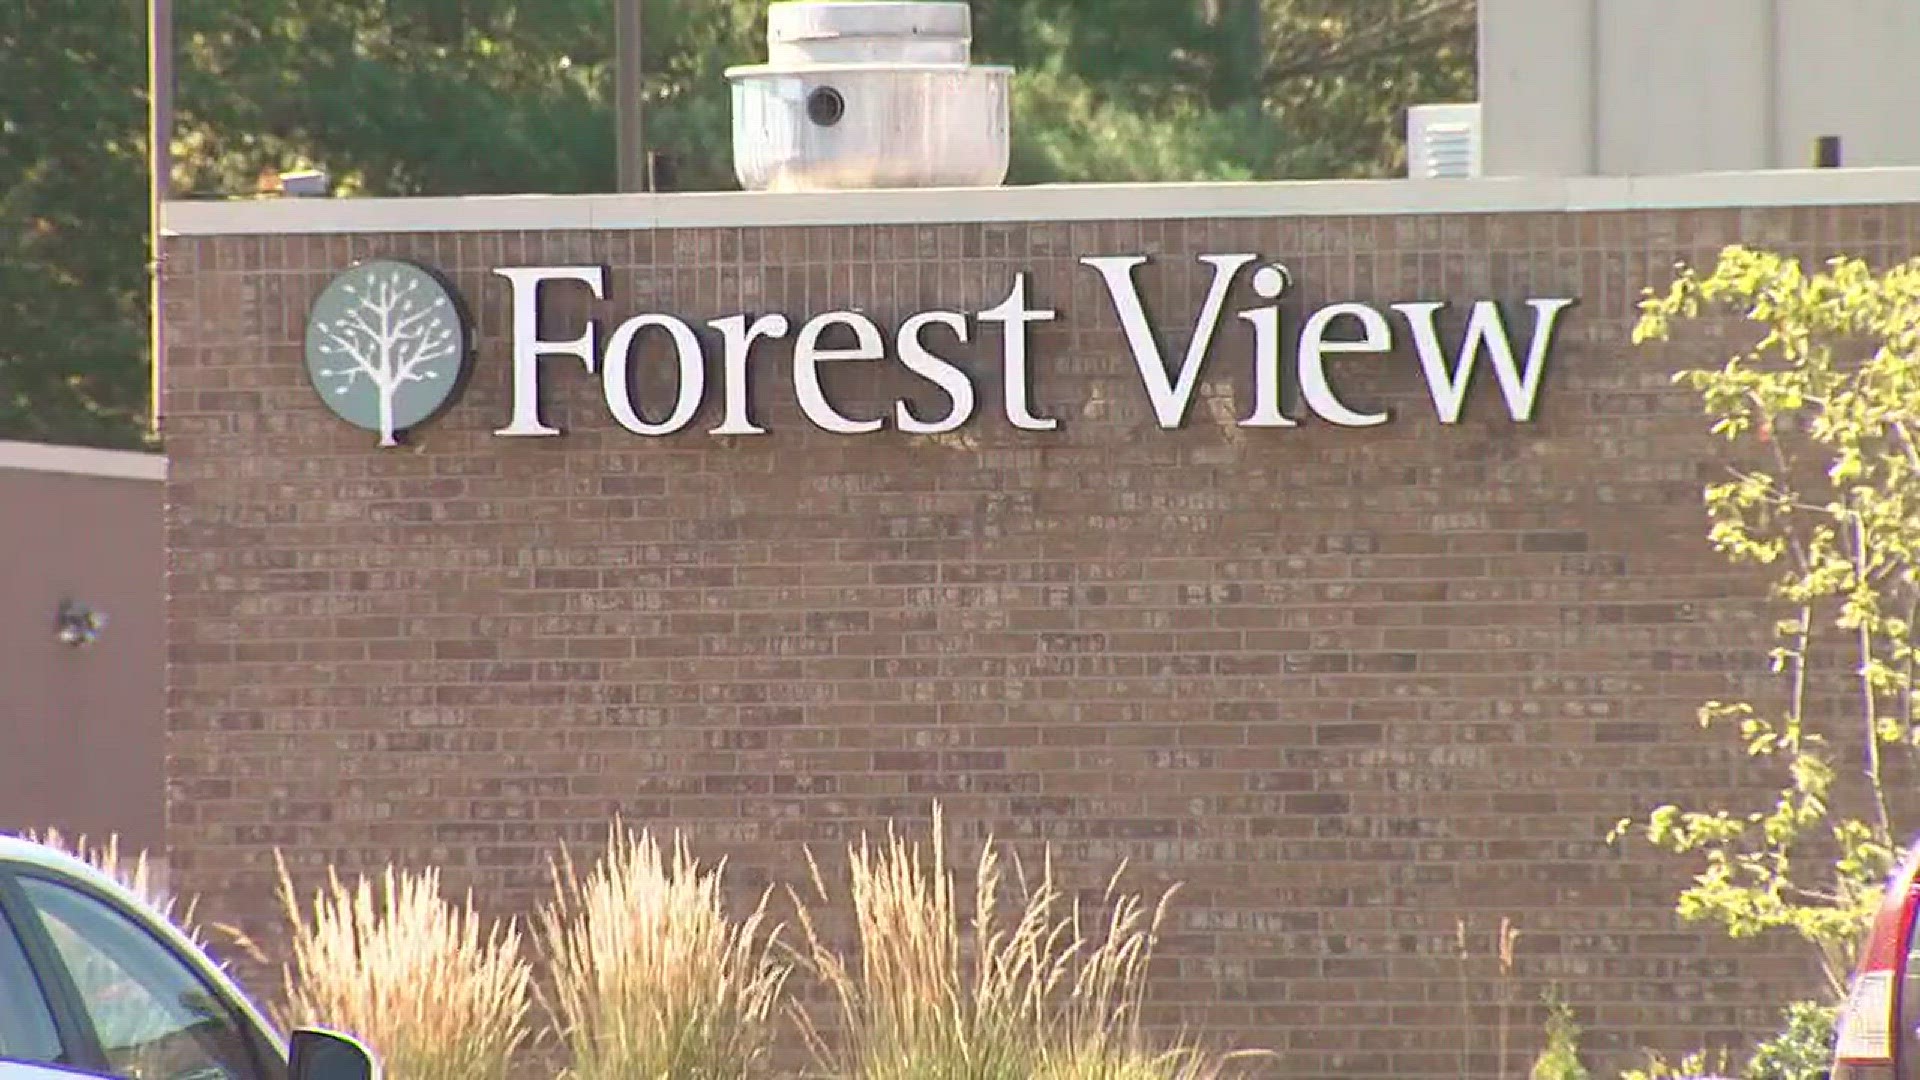 The woman was sexually assaulted at the Forest View Psychiatric Hospital.